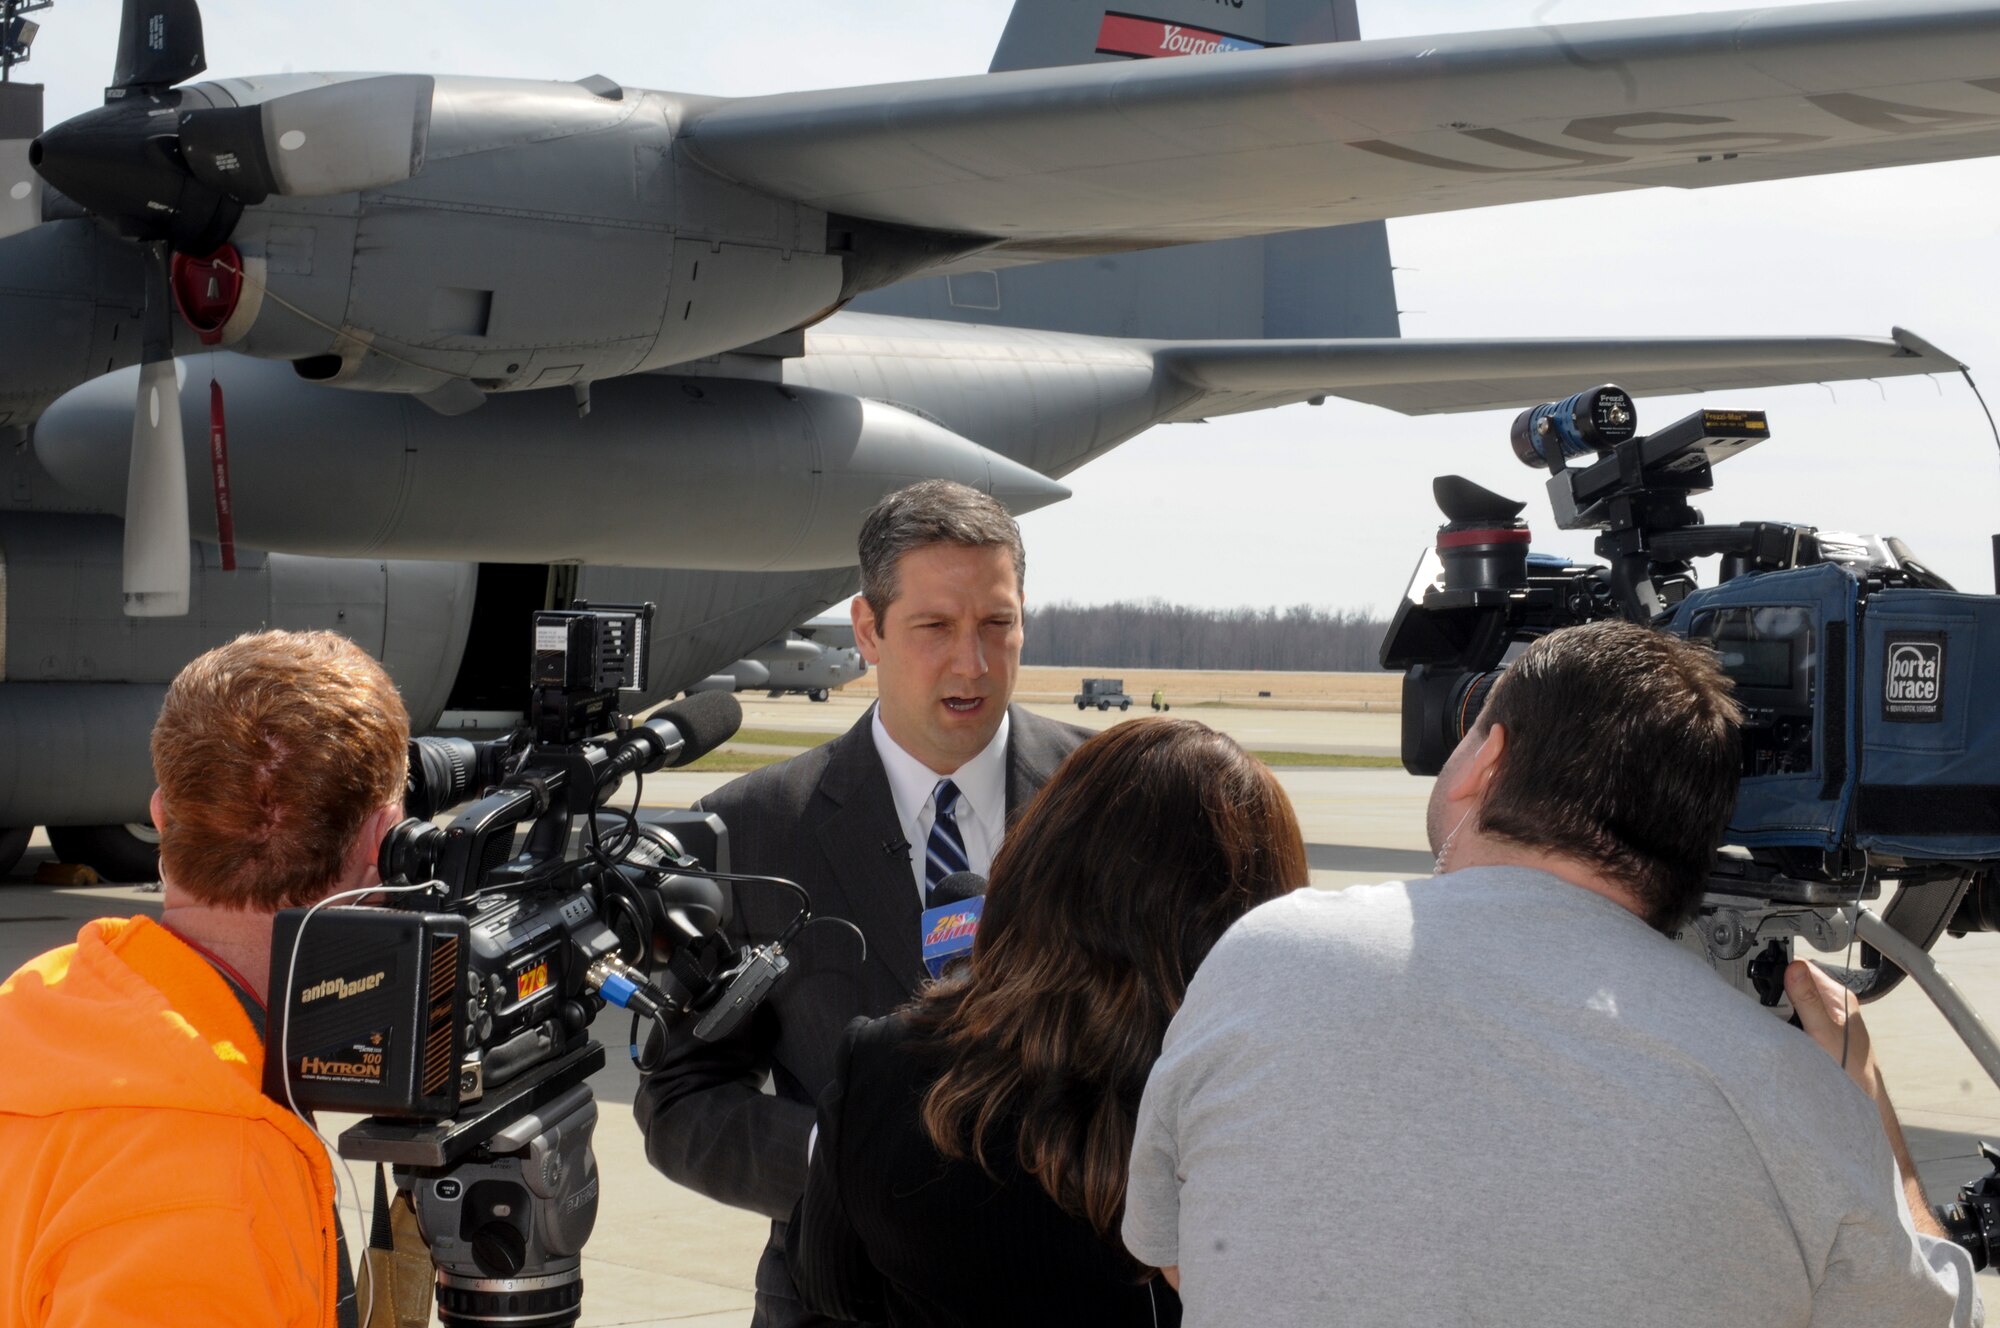 Congressman Tim Ryan of Ohio’s 13th district is interviewed by local media personnel while standing in front of a Youngstown Air Reserve Station C-130 Hercules aircraft here, April 6, 2014. Ryan was a distinguished guest at the deactivation ceremony for the 773rd Airlift Squadron. The 773rd Airlift Squadron, which was activated as a unit of the 910th Airlift Wing in 1995, was officially deactivated on March 31. The deactivation resulted from Air Force structure changes that reduced the 910th’s C-130 aircraft fleet to eight Primary Assigned Aircraft and on Back-up Inventory Aircraft. U.S. Air Force photo/Senior Airman Rachel Kocin.